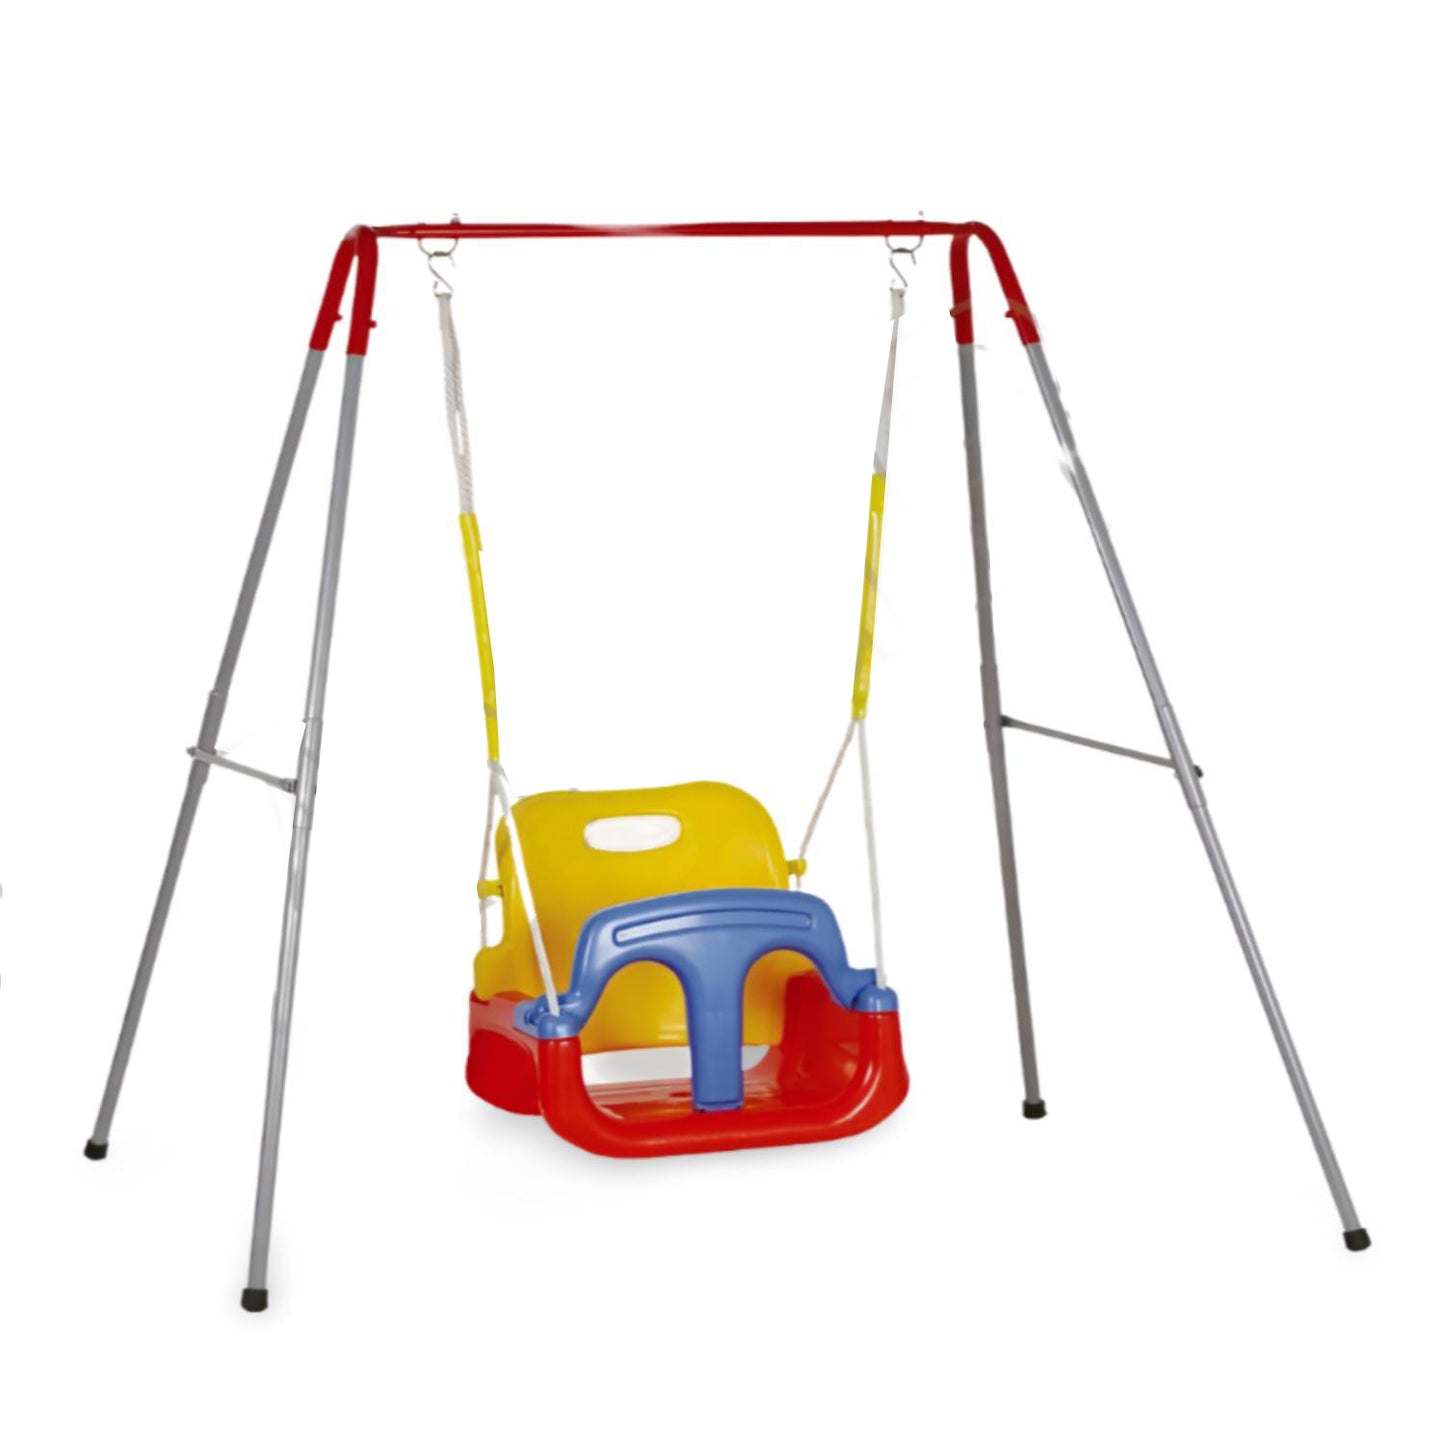 PlayGro Model 3101 - Heavy Duty Foldable Garden Swing with Solid Alloy Stand - For Kids 2 to 6 Years